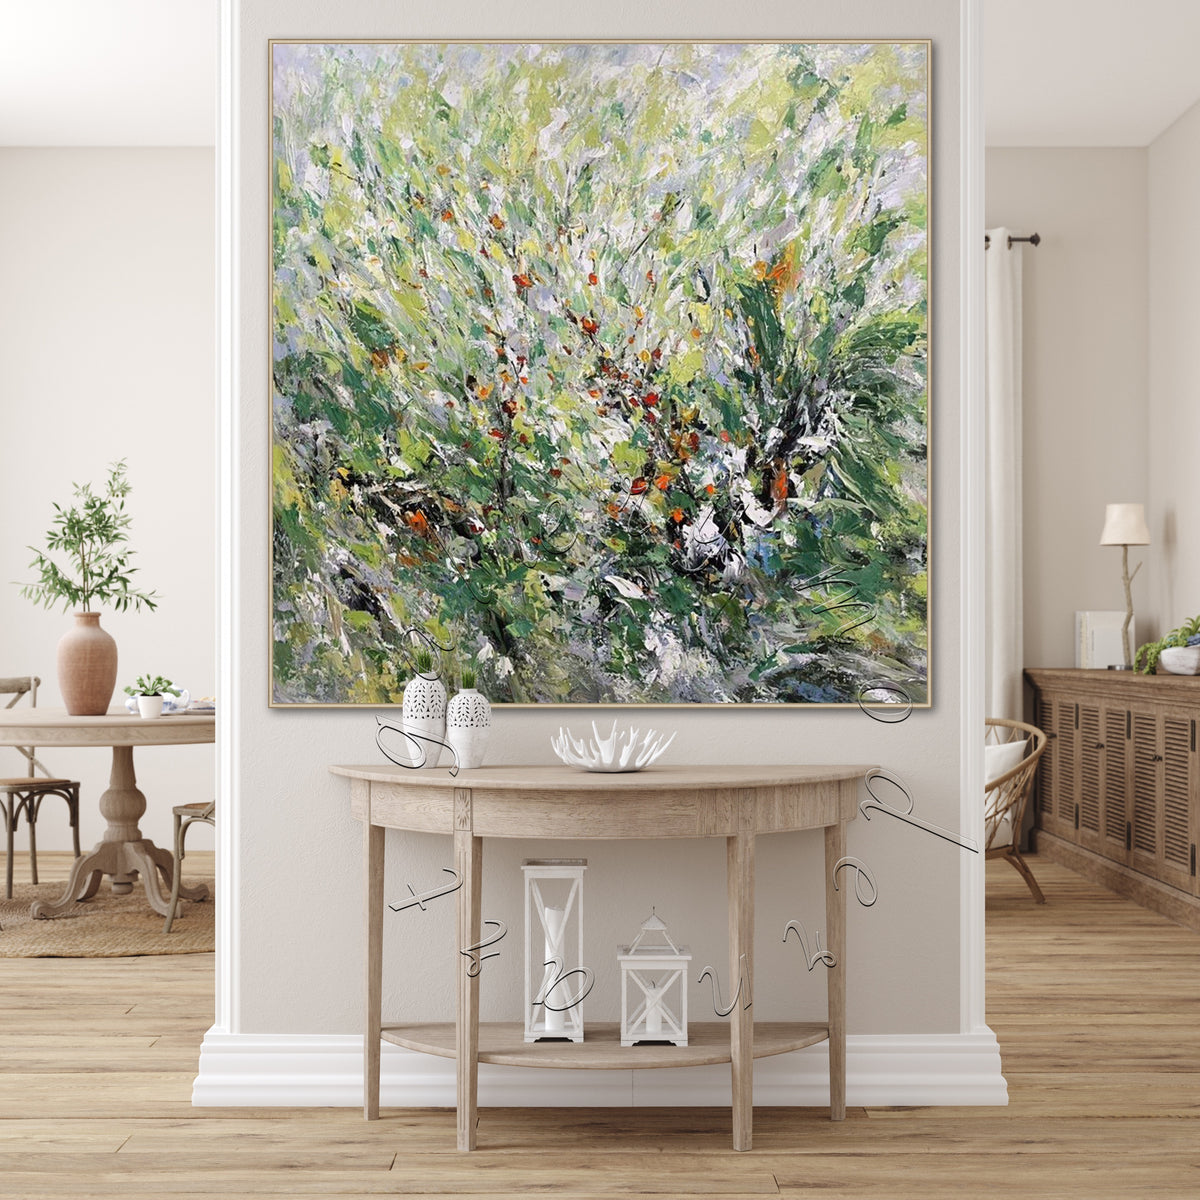 Wild Flowers Abstract Painting, Textured Original Oil Painting, Square Wall Art